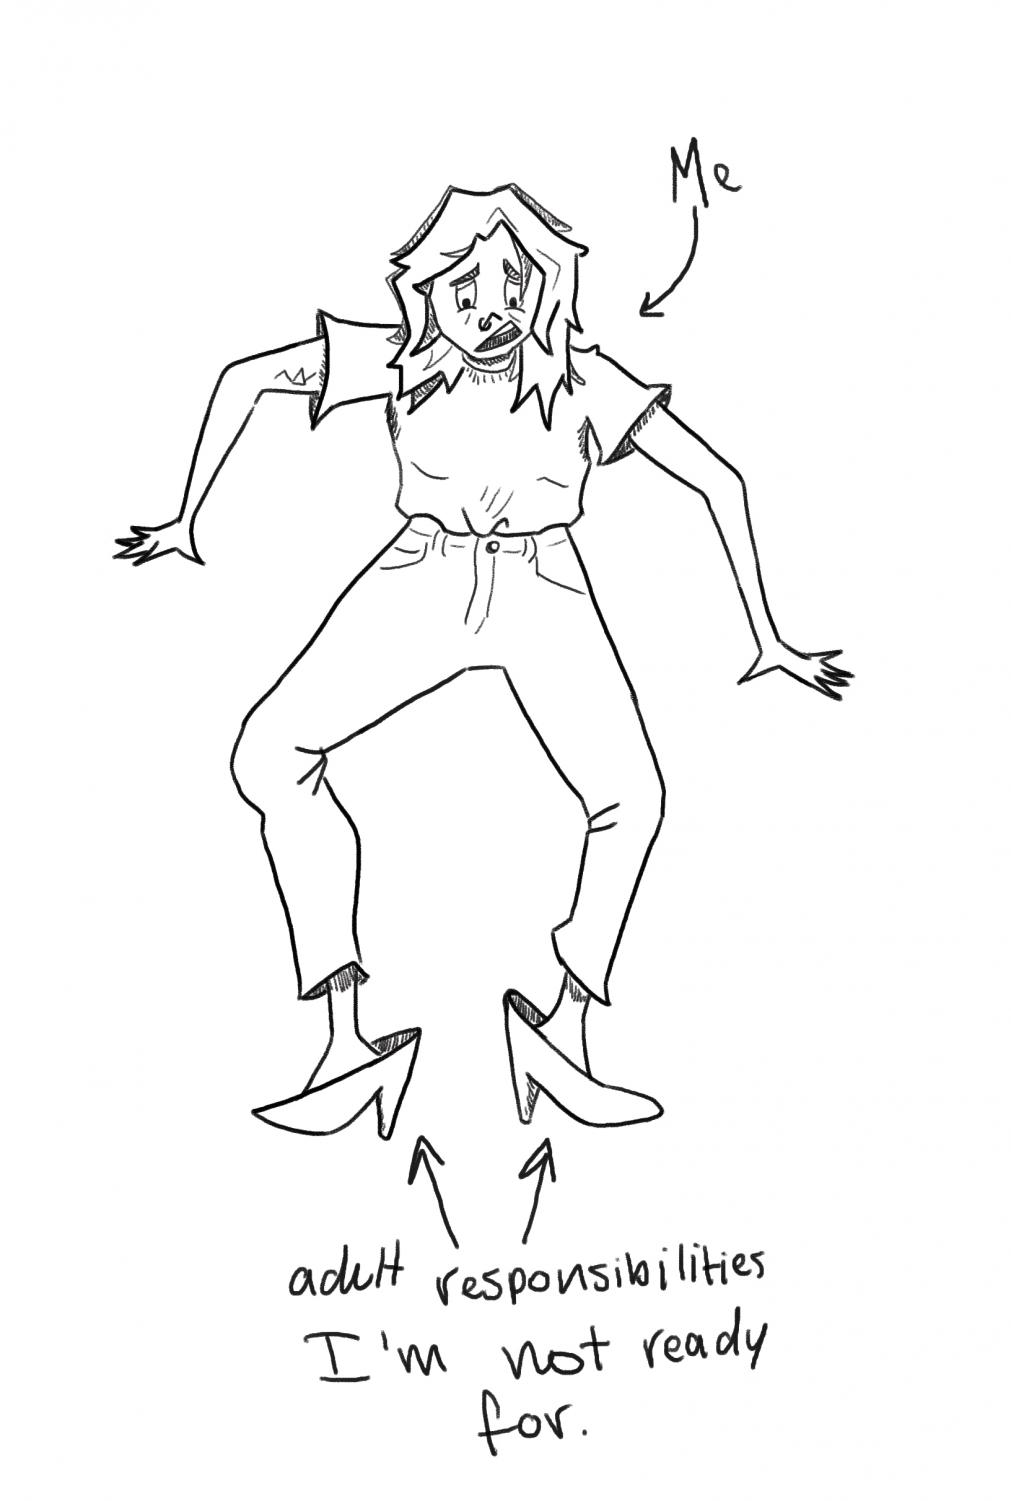 Girl in massive heals looks clumsy. Arrow pointing to girl say, "Me" and arrows point to massive shoes say "adult responsibilities I'm not ready for." 